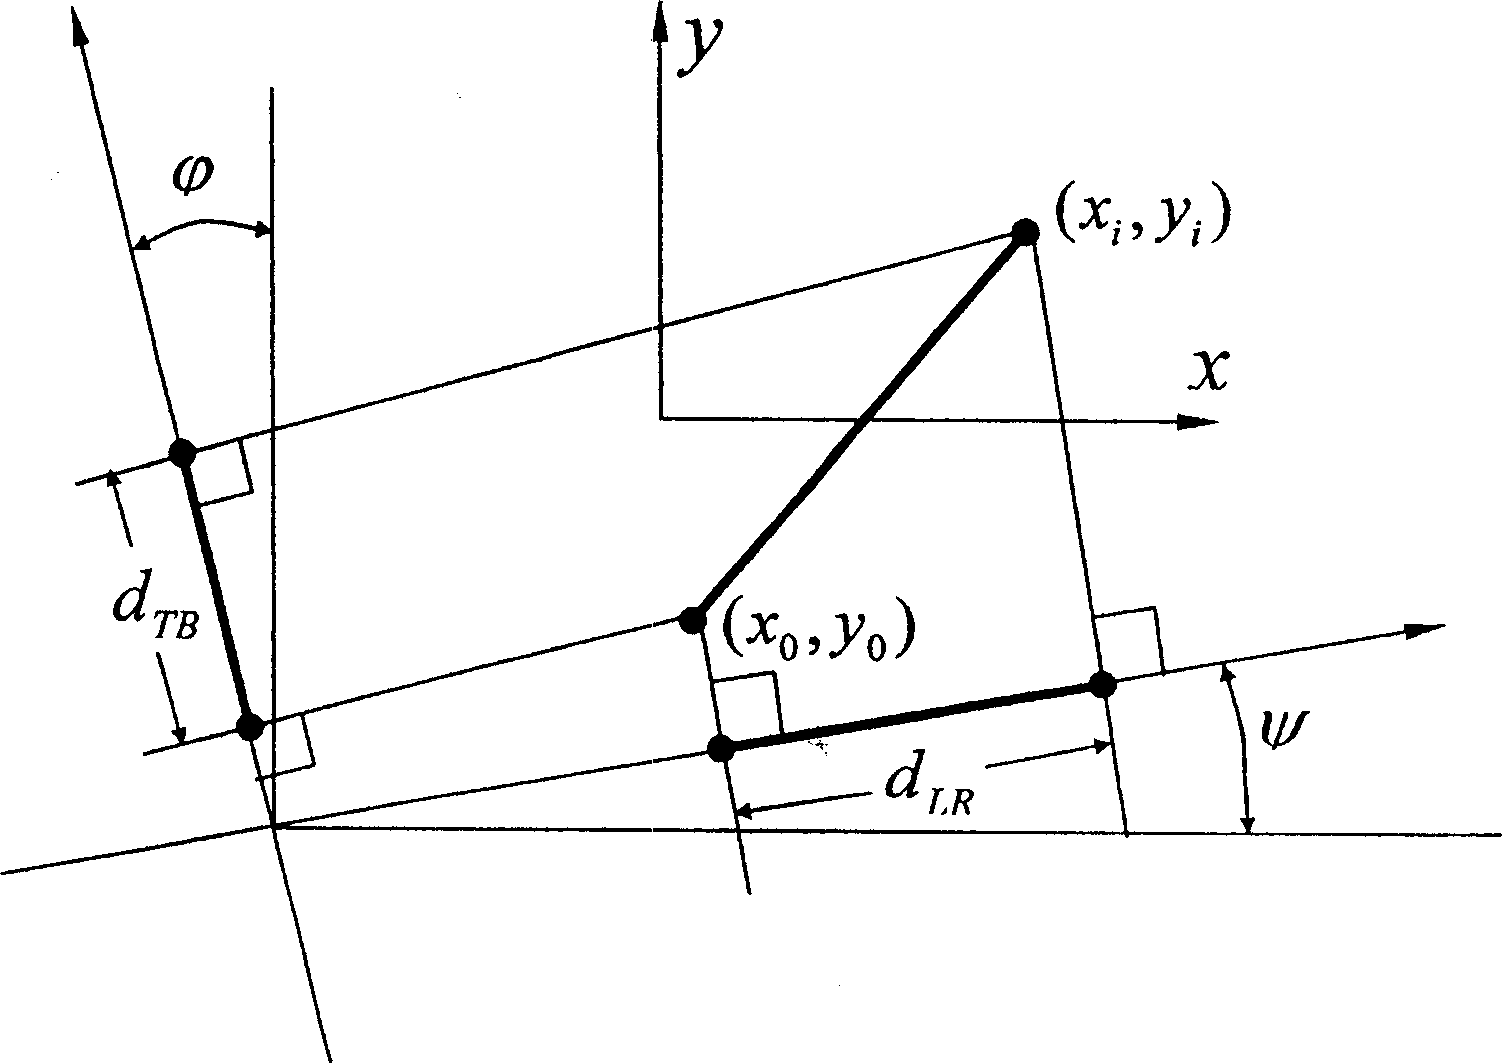 Small-displacement measuring method in long-distance plane